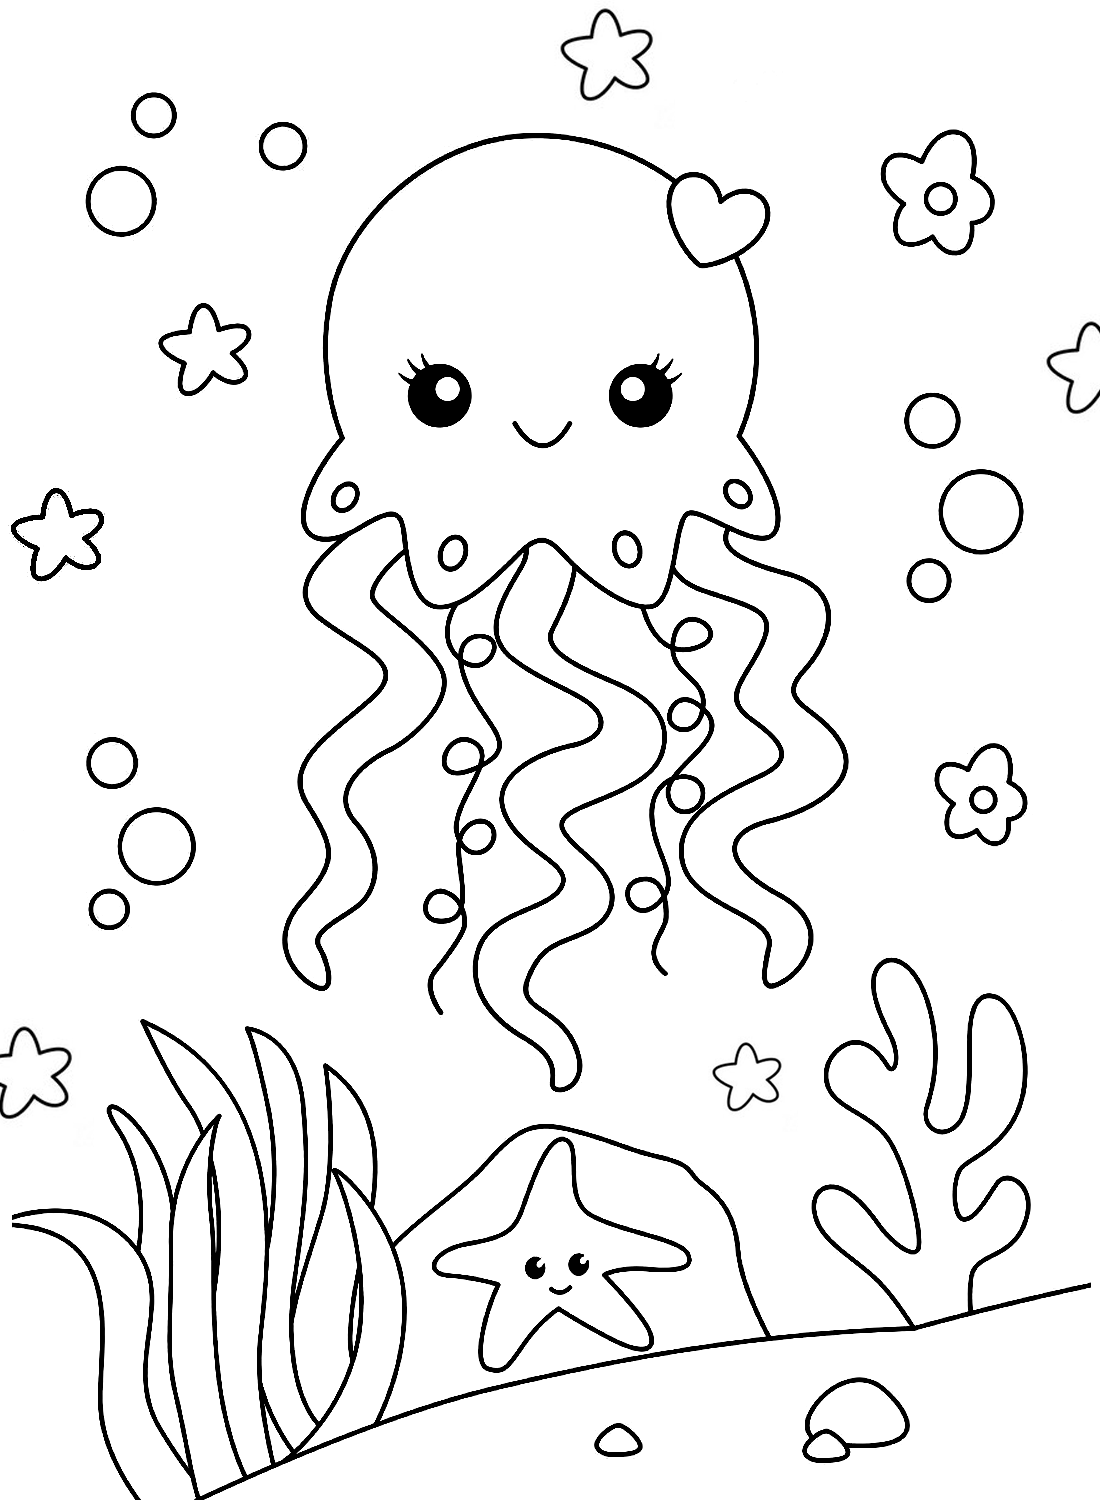 The Jellyfish Coloring Page - Free Printable Coloring Pages